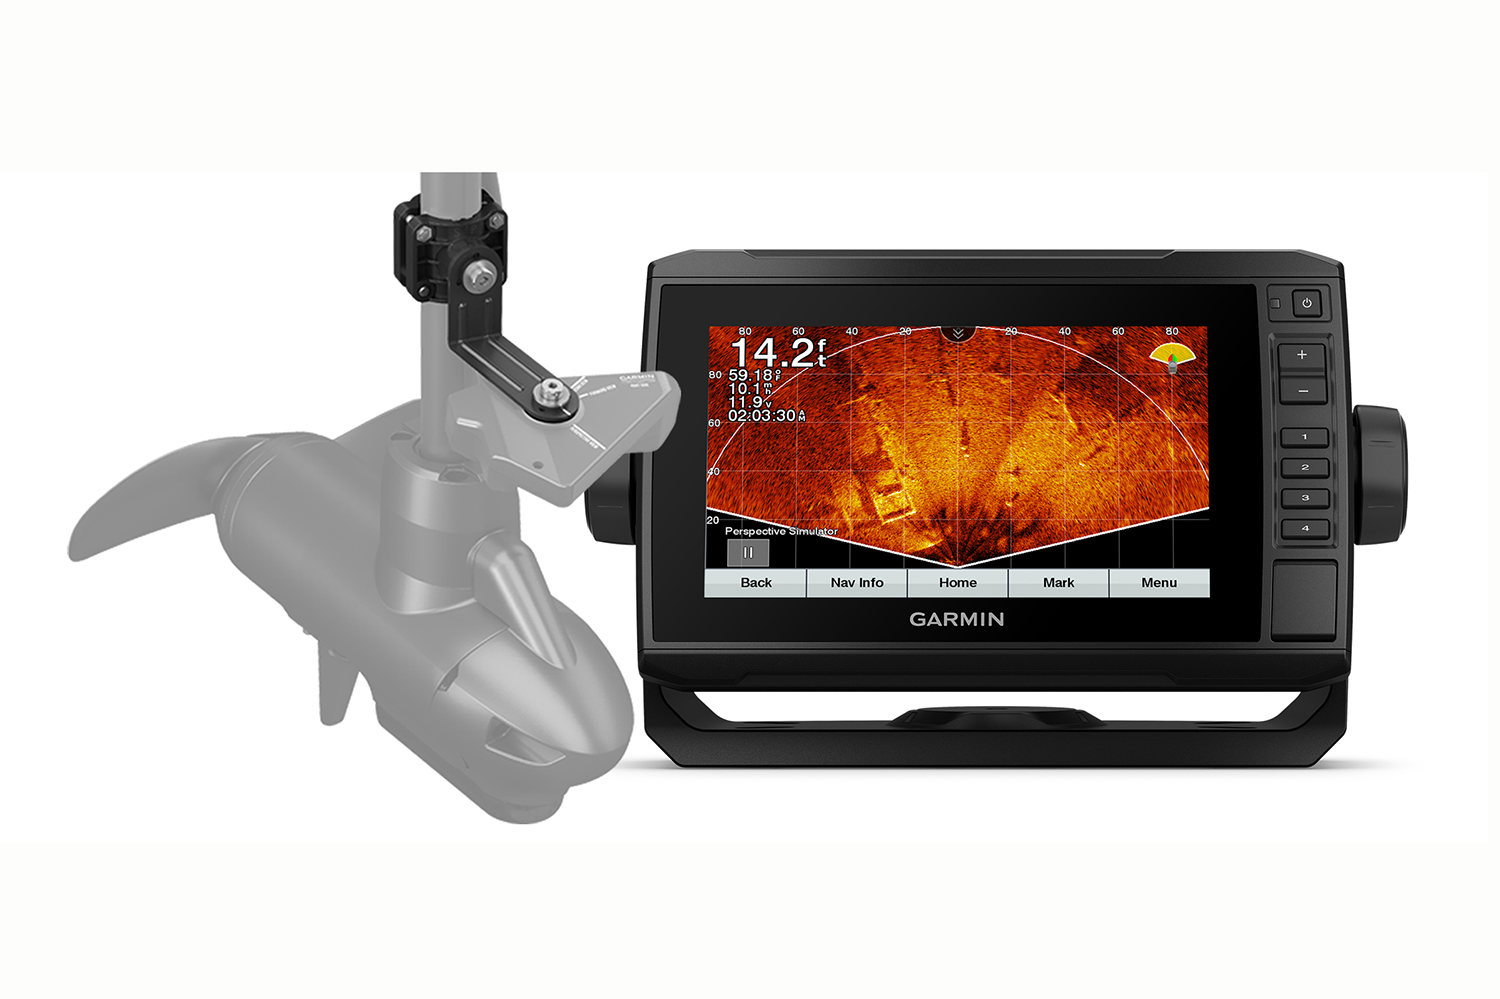 <p><b>Garmin Panoptix LiveScope Perspective Mode Mount </b></p>
<p>Description: The Perspective Mode Mount takes your Panotpix LiveScope real-time scanning sonar to the next level. Attached your LVS32 transducer to this mount to add an overhead sonar view thatâs perfect for scouting and fishing in shallow water. With the new Perspective Mode mount, the transducer can be easily adjusted to fit your fishing techniques and preferences, no tools required, and the chartplotter will automatically detect what mode is being used. Simply turn the transducer sideways to enable the new âtop downâ perspective mode to see a wide variety of views. </p>
<p><a href=